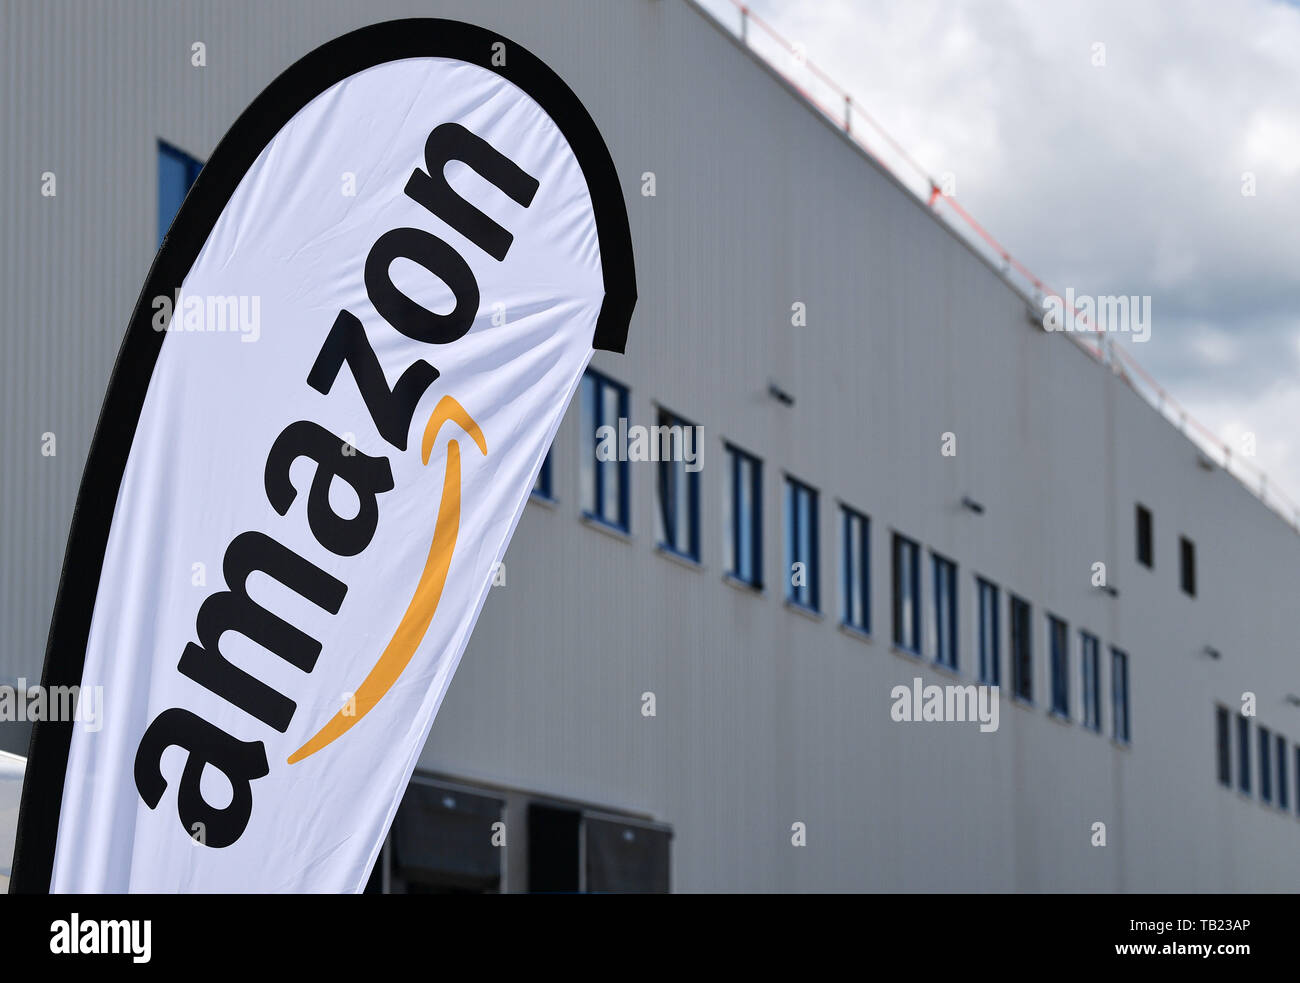 Erfurt, Germany. 29th May, 2019. An Amazon banner is blowing in front of  the future Amazon distribution centre, which is scheduled to start  operations in autumn 2019. This will add a distribution